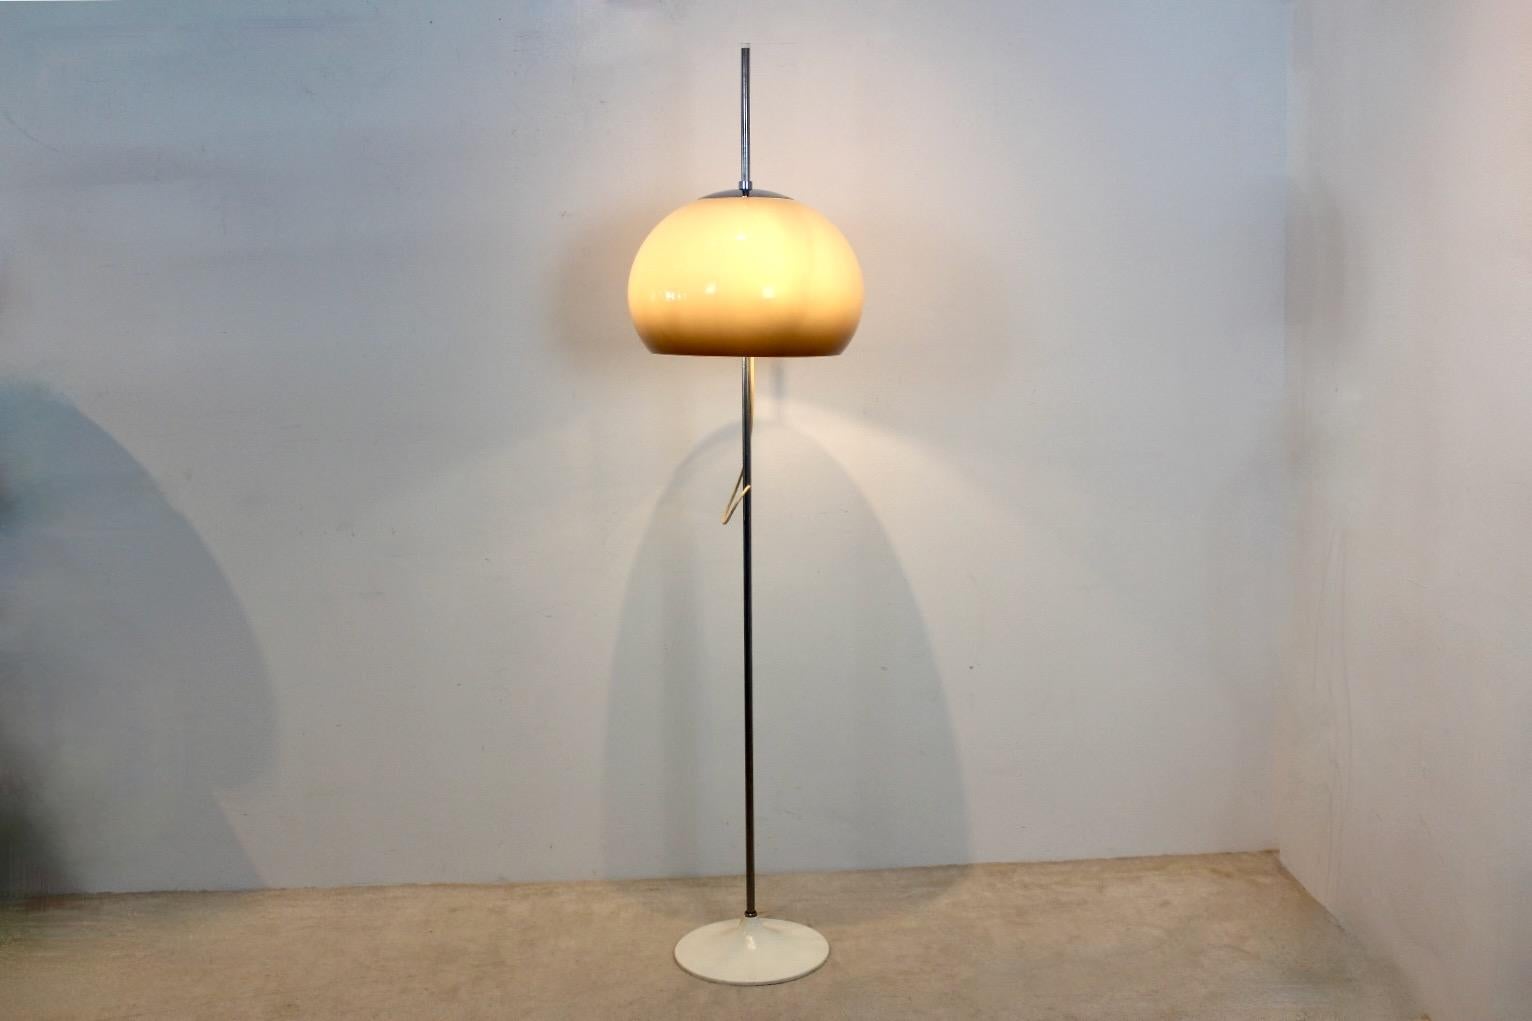 Iconic Gepo designed chrome and Creamy-Sand Floor Light from the ‘60s. This impressively Floor lamp features a chrome bar with a sand-colored shade and white arco base. It comes with 3 adjustable lamps and a Lucite accent at the top of the chrome